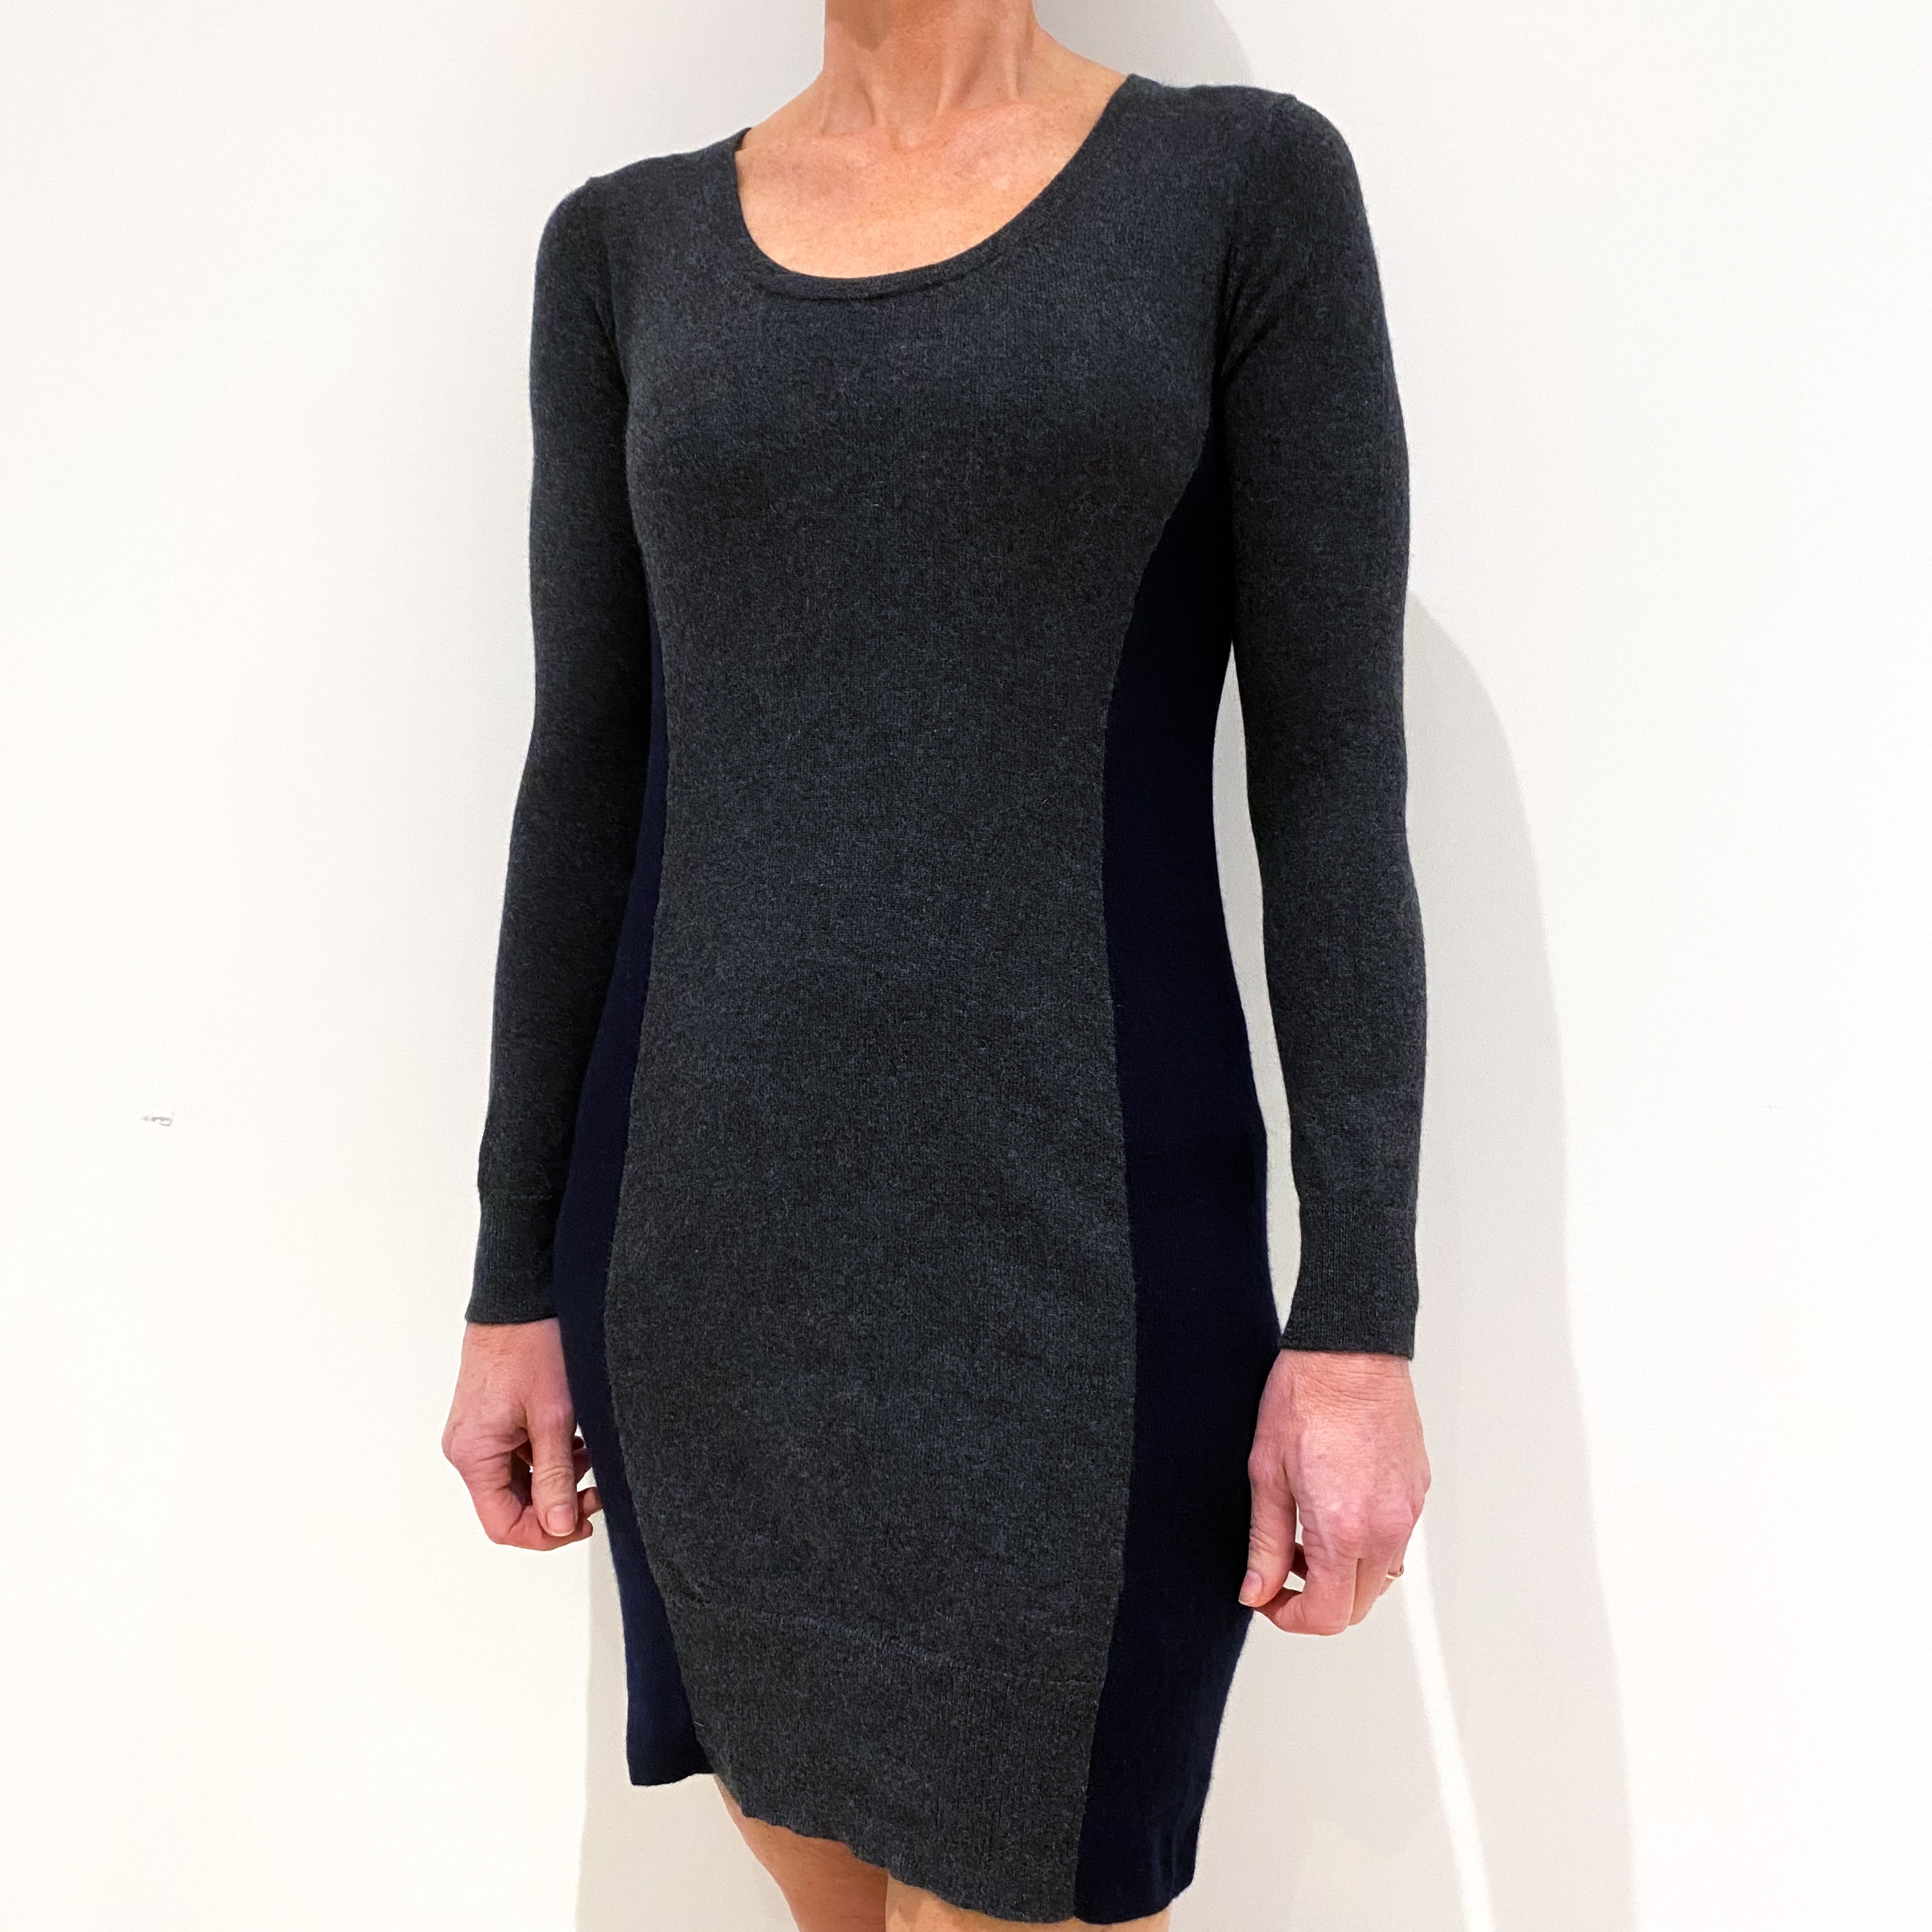 Charcoal Grey Cashmere Scoop Neck Dress Small